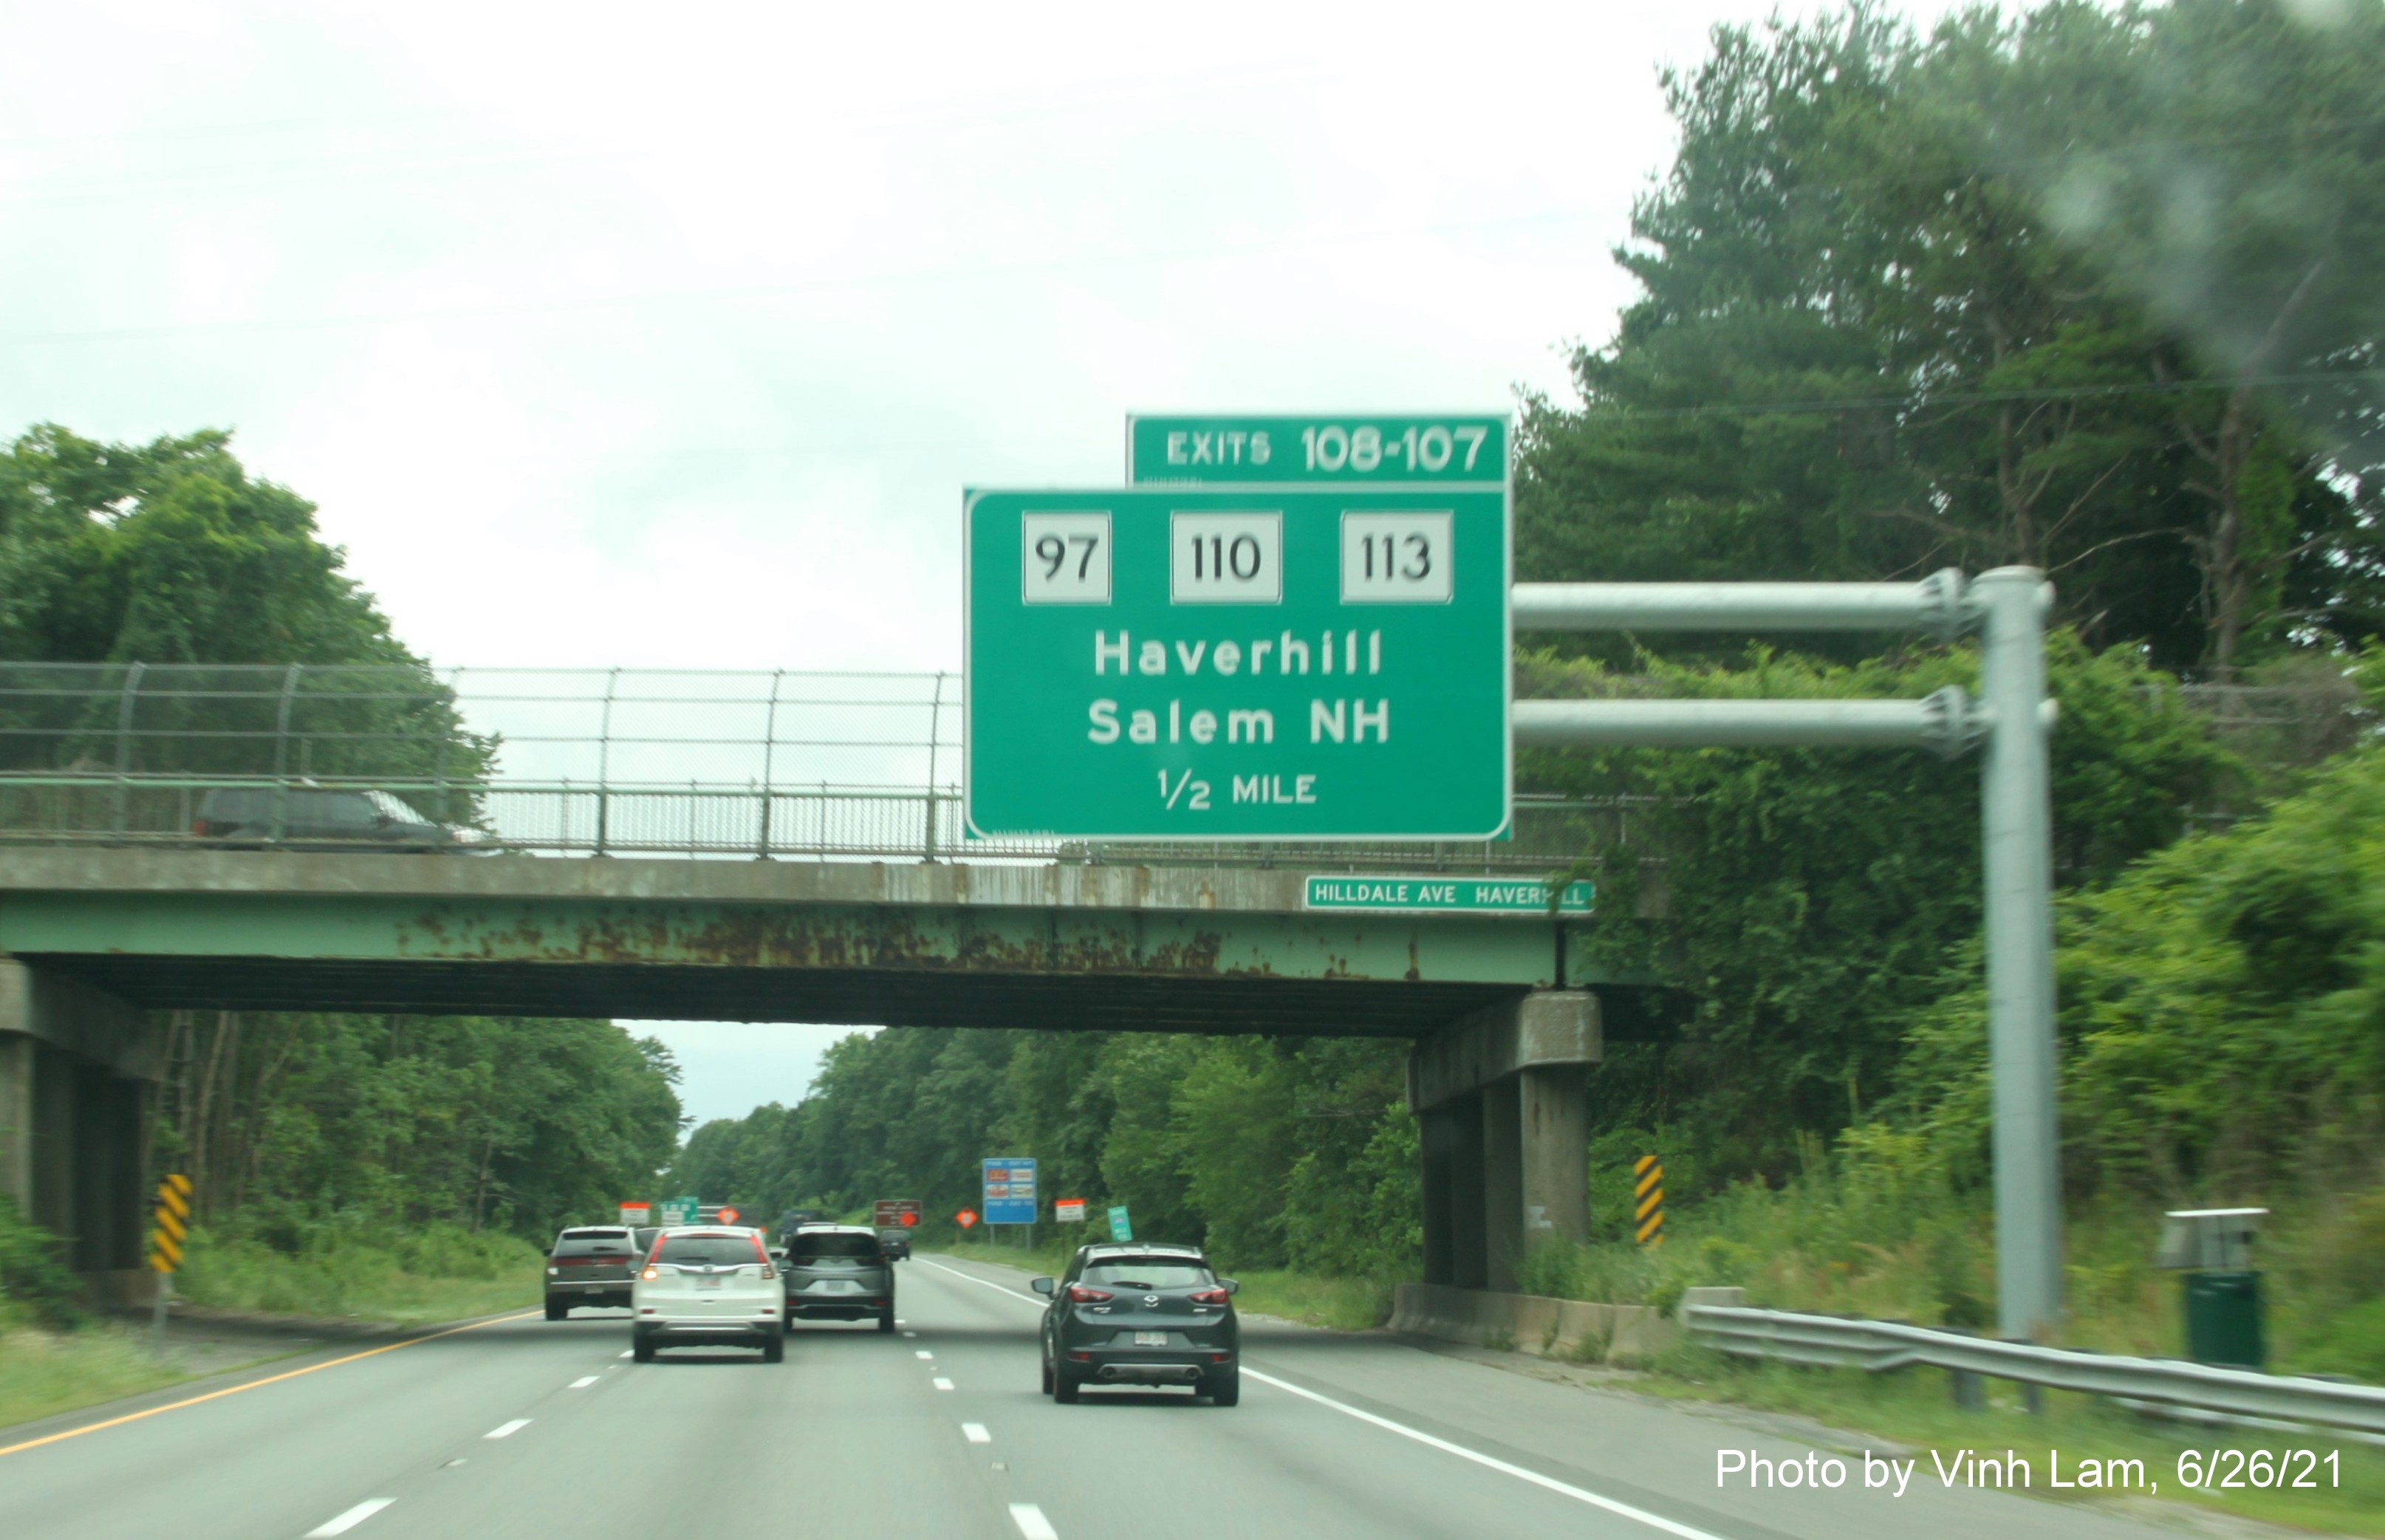 Image of 1/2 Mile advance overhead sign for MA 97 and MA 110/113 exits with new milepost based exit numbers on I-495 South in Haverhill, photo by Vinh Lam, June 2021